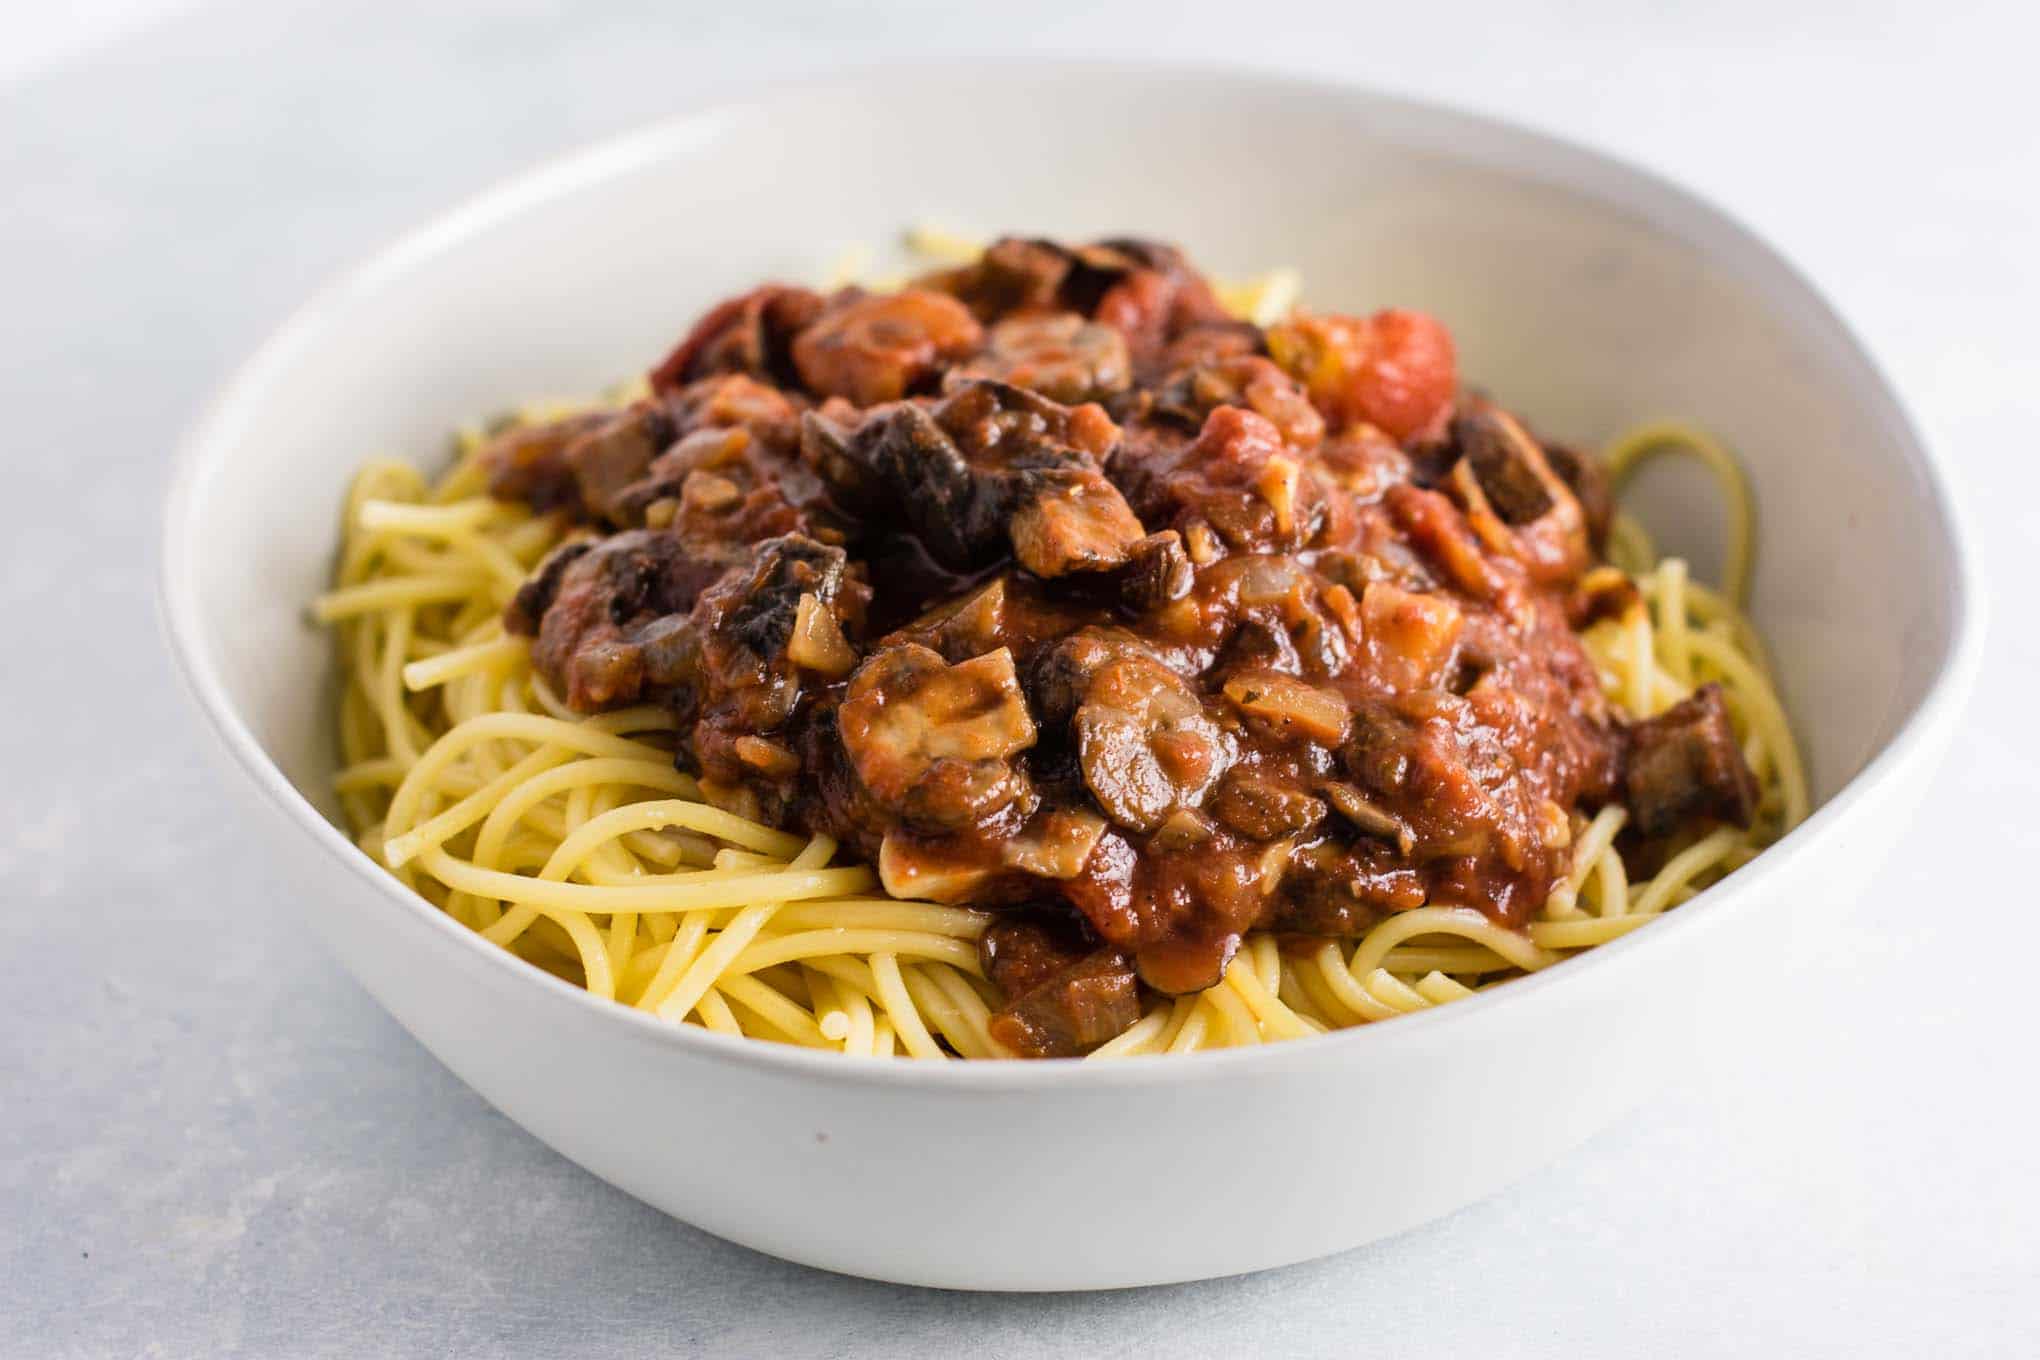 meatless spaghetti sauce over pasta in a white bowl